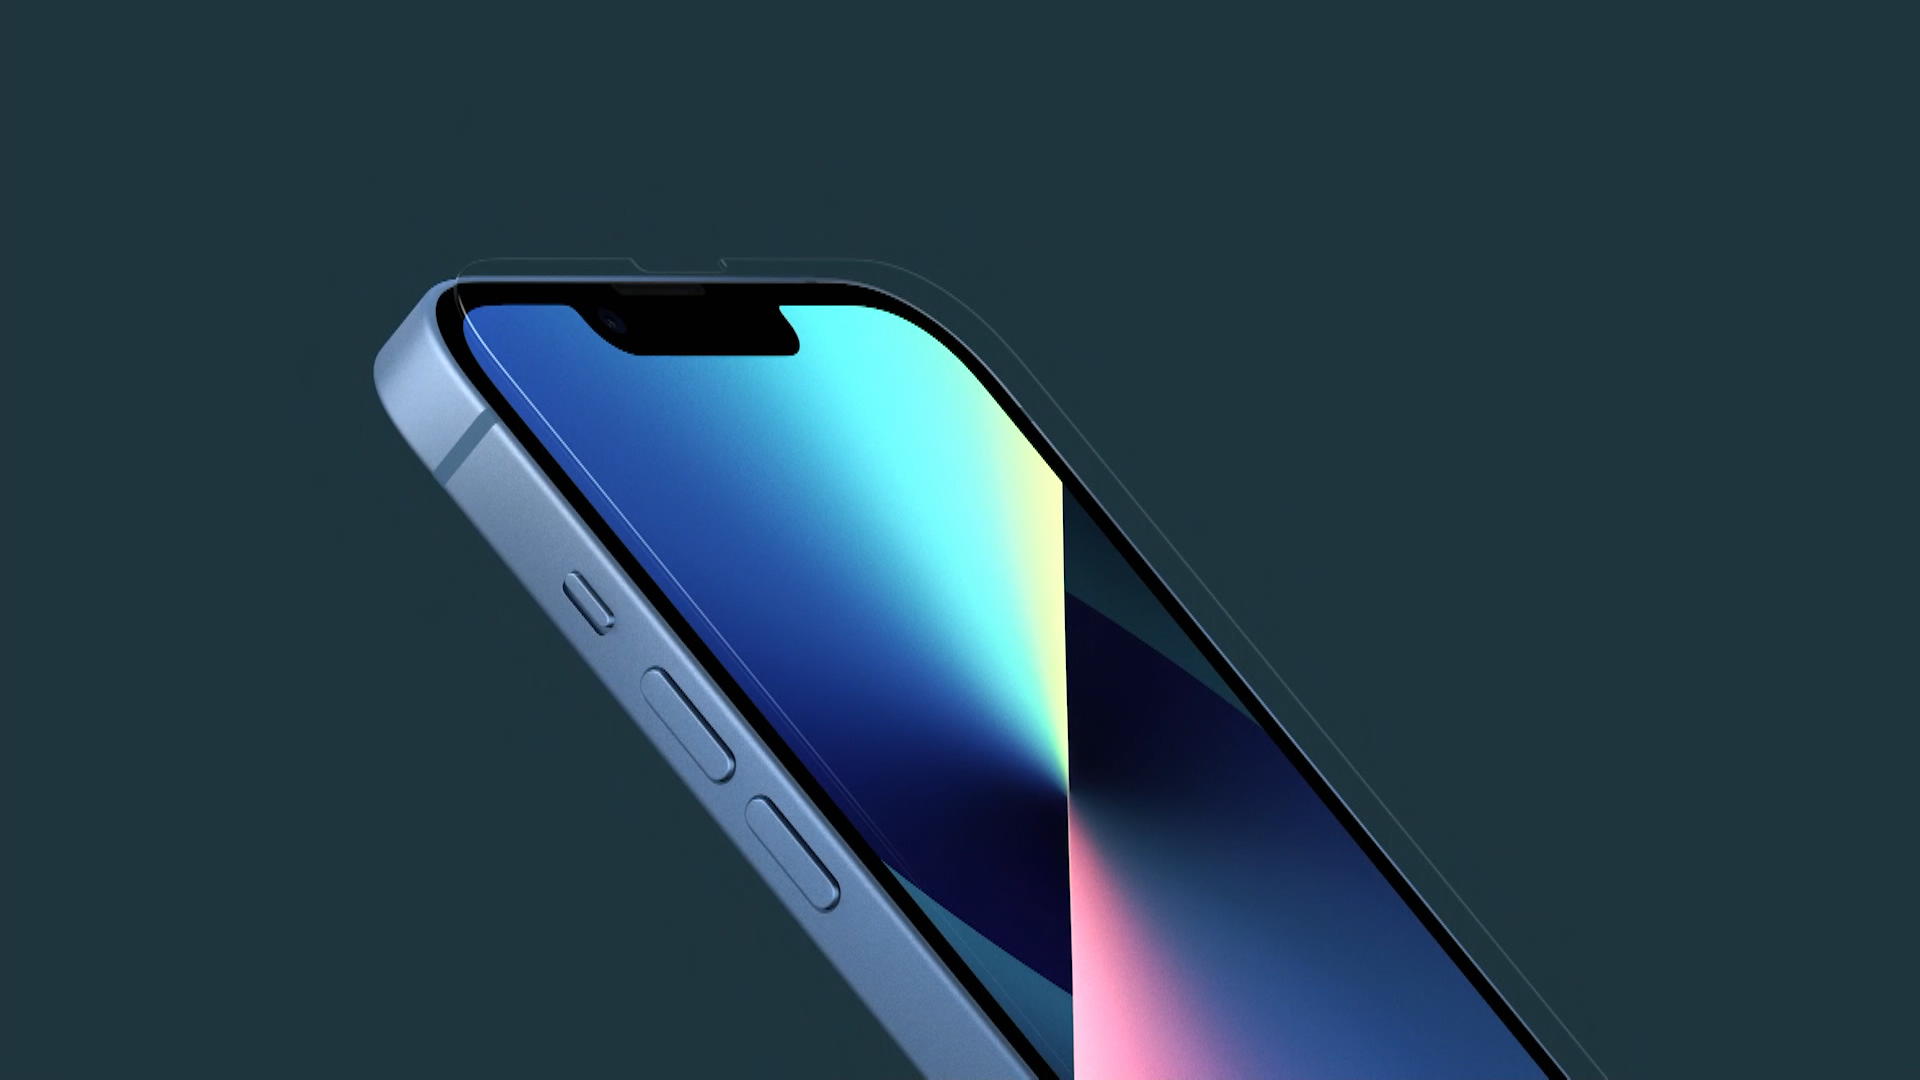 Apple Iphone 13 Mini Max Max Pro Models Unveiled With Ios 15 pl Bloomberg